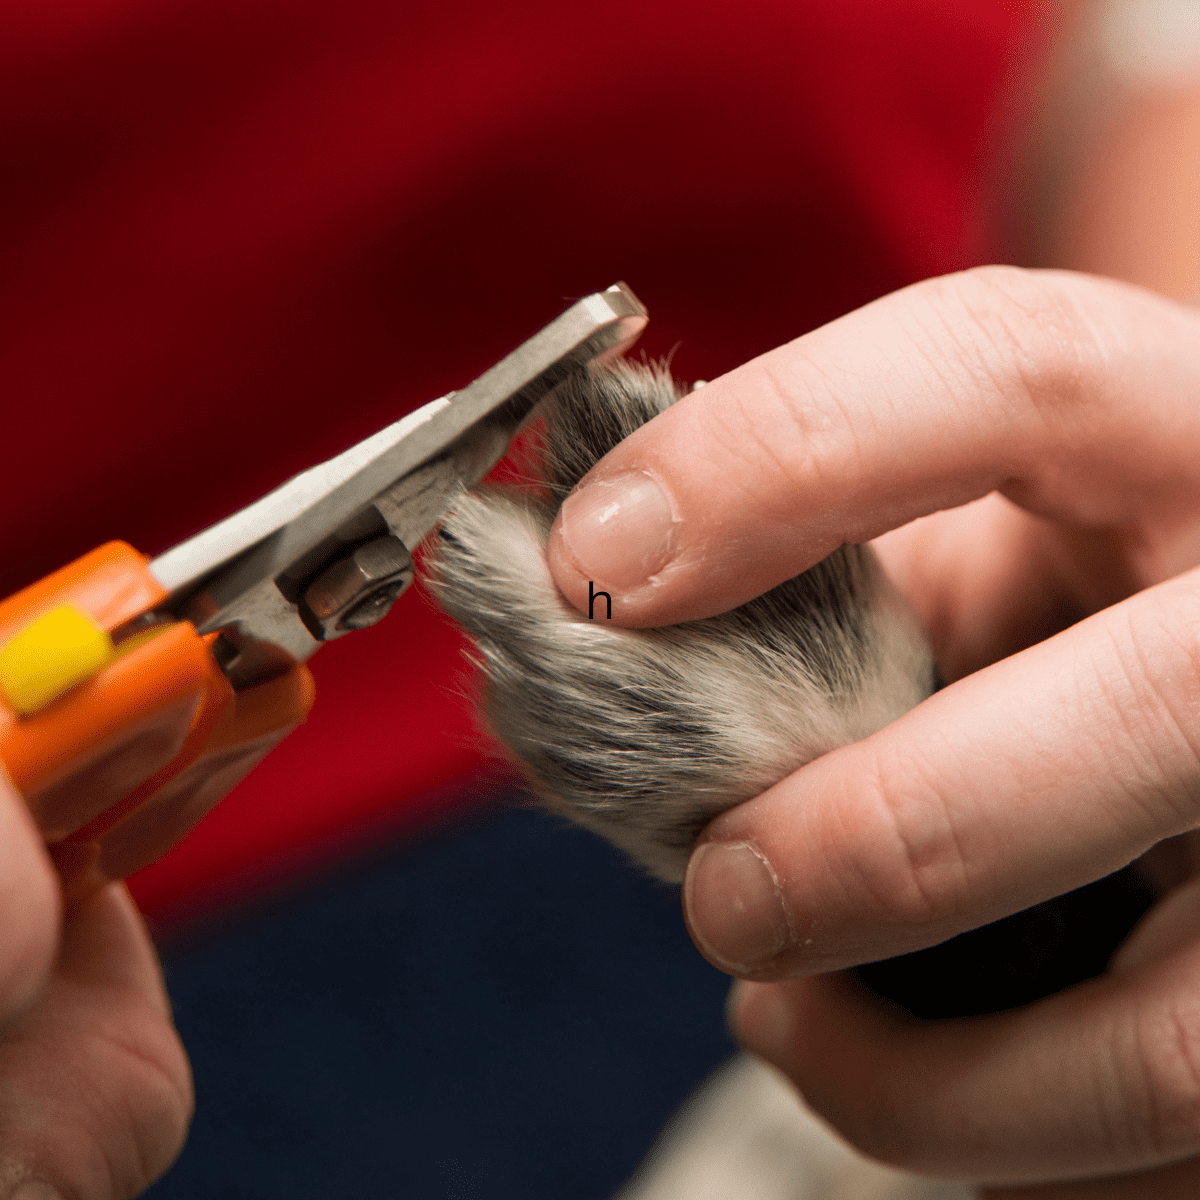 How to Trim Your Dog's Black Nails Safely | The Dog People by Rover.com